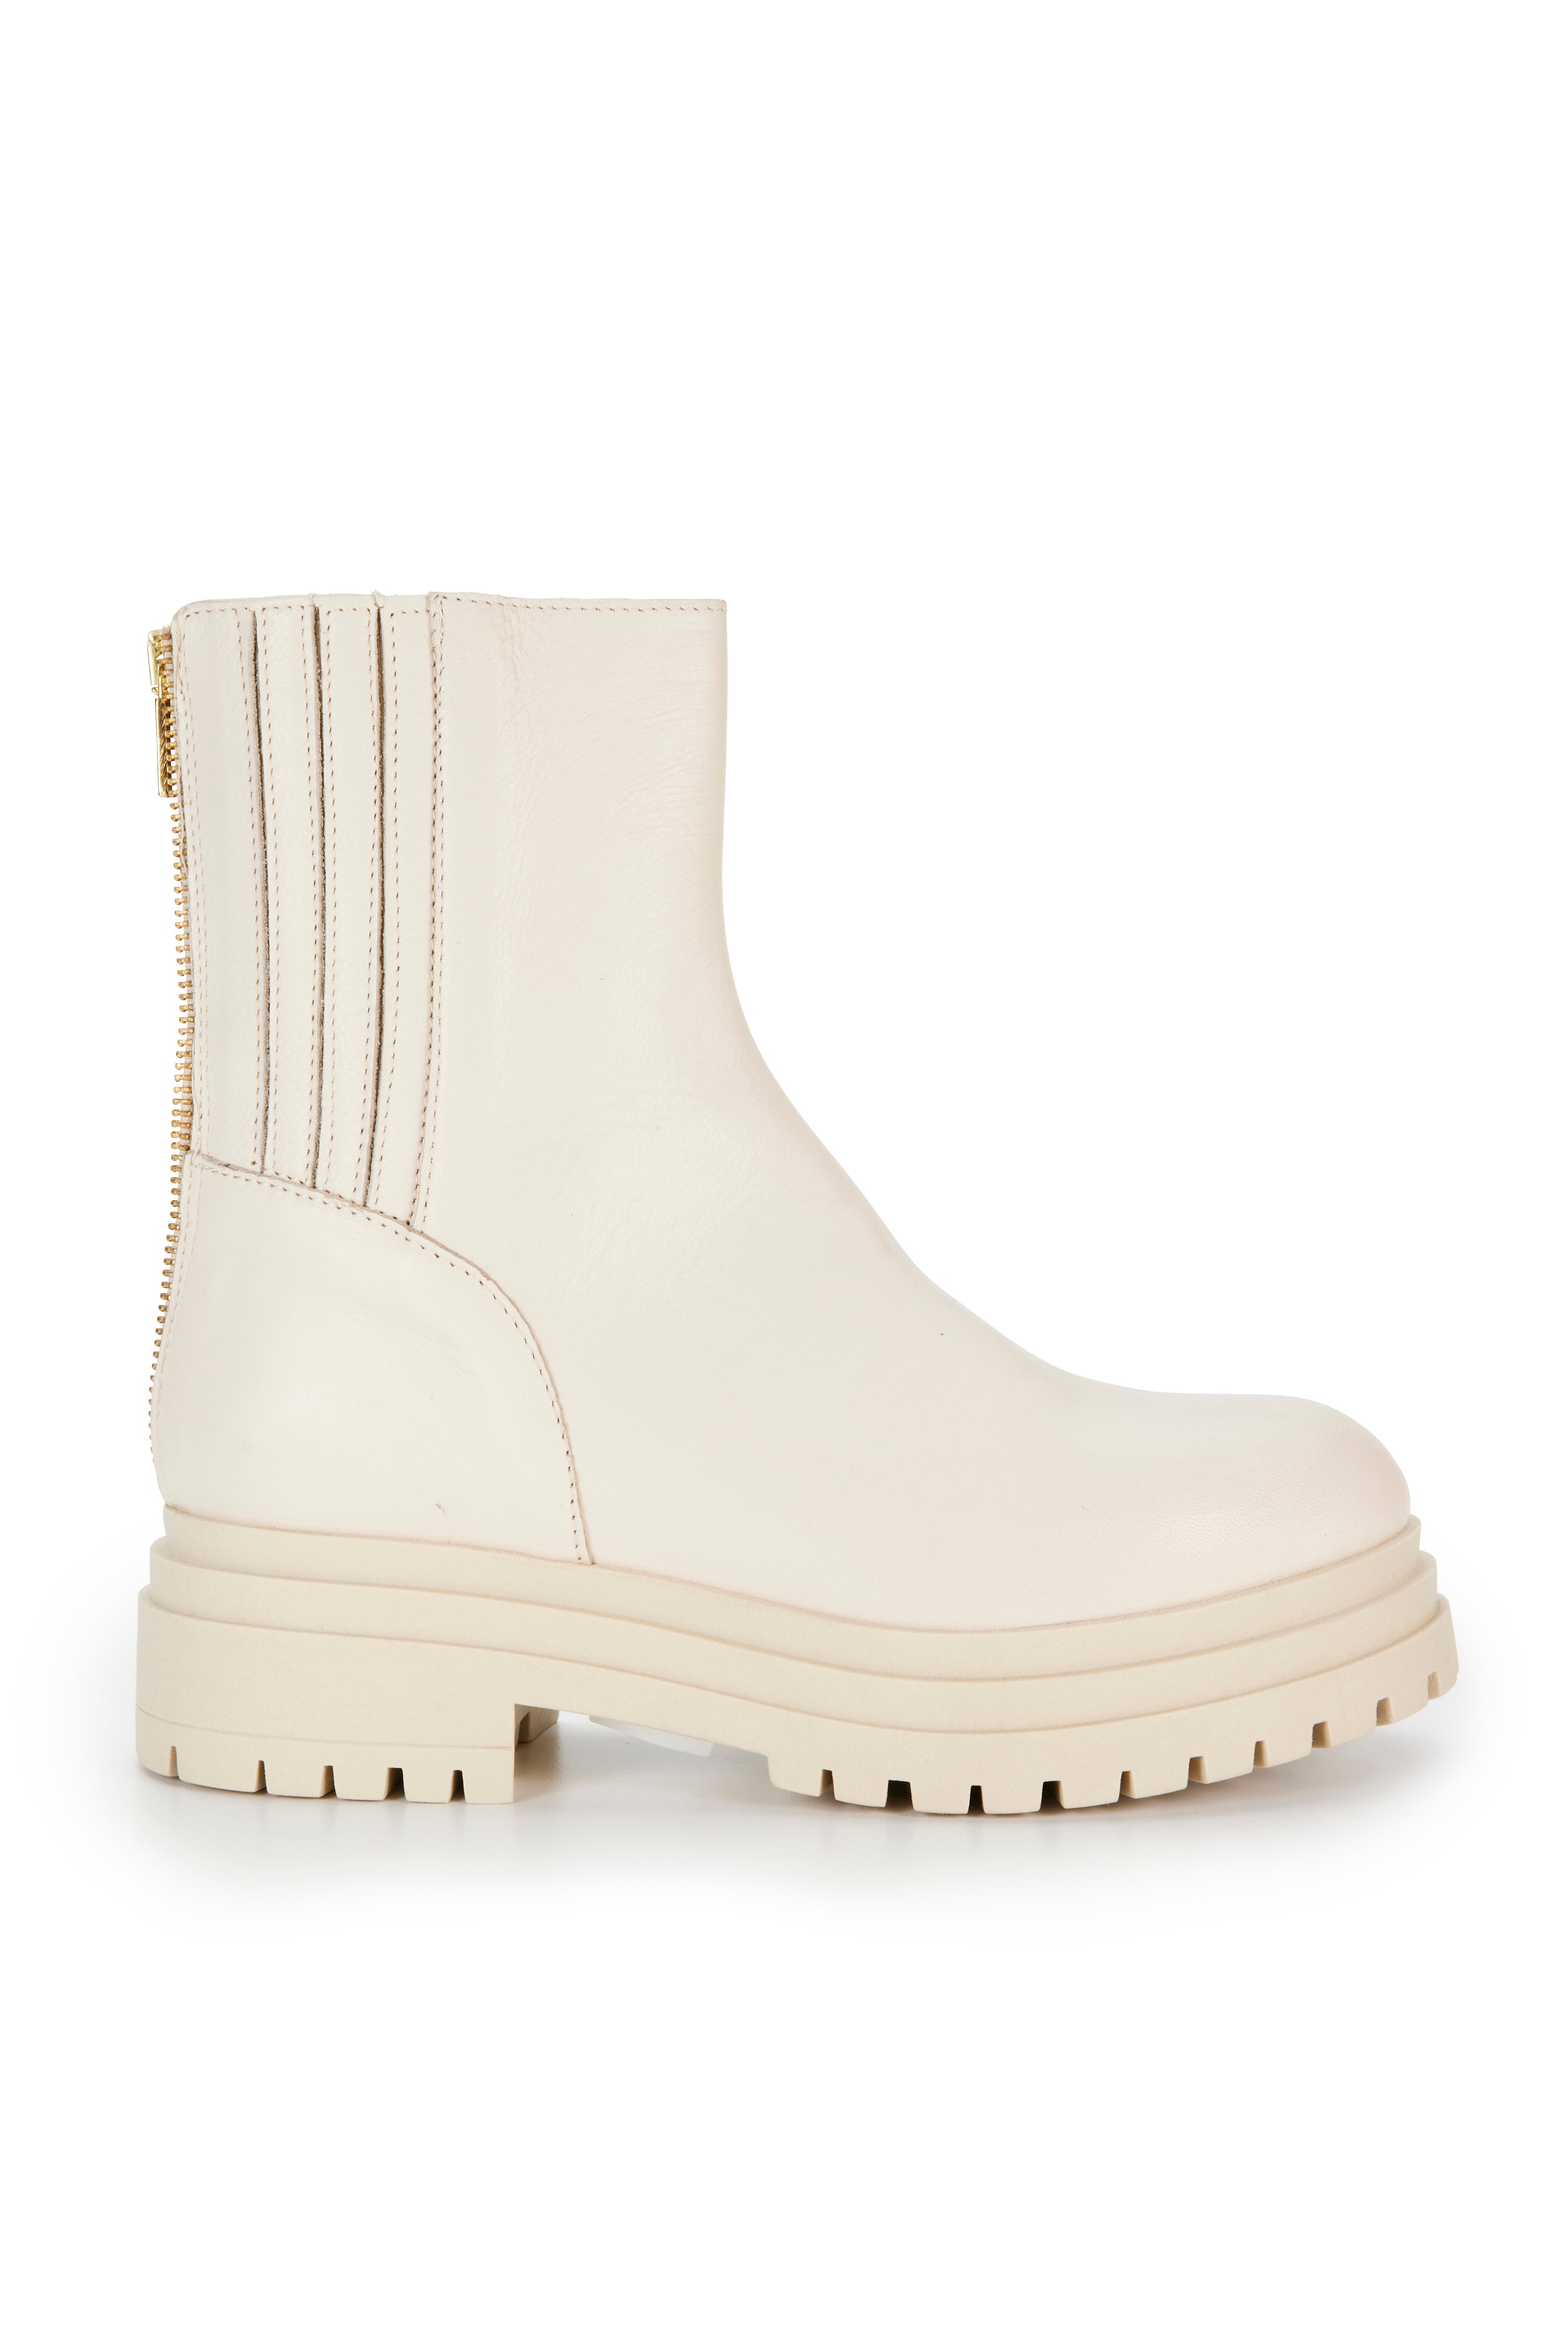 Canyon Boot - Ivory